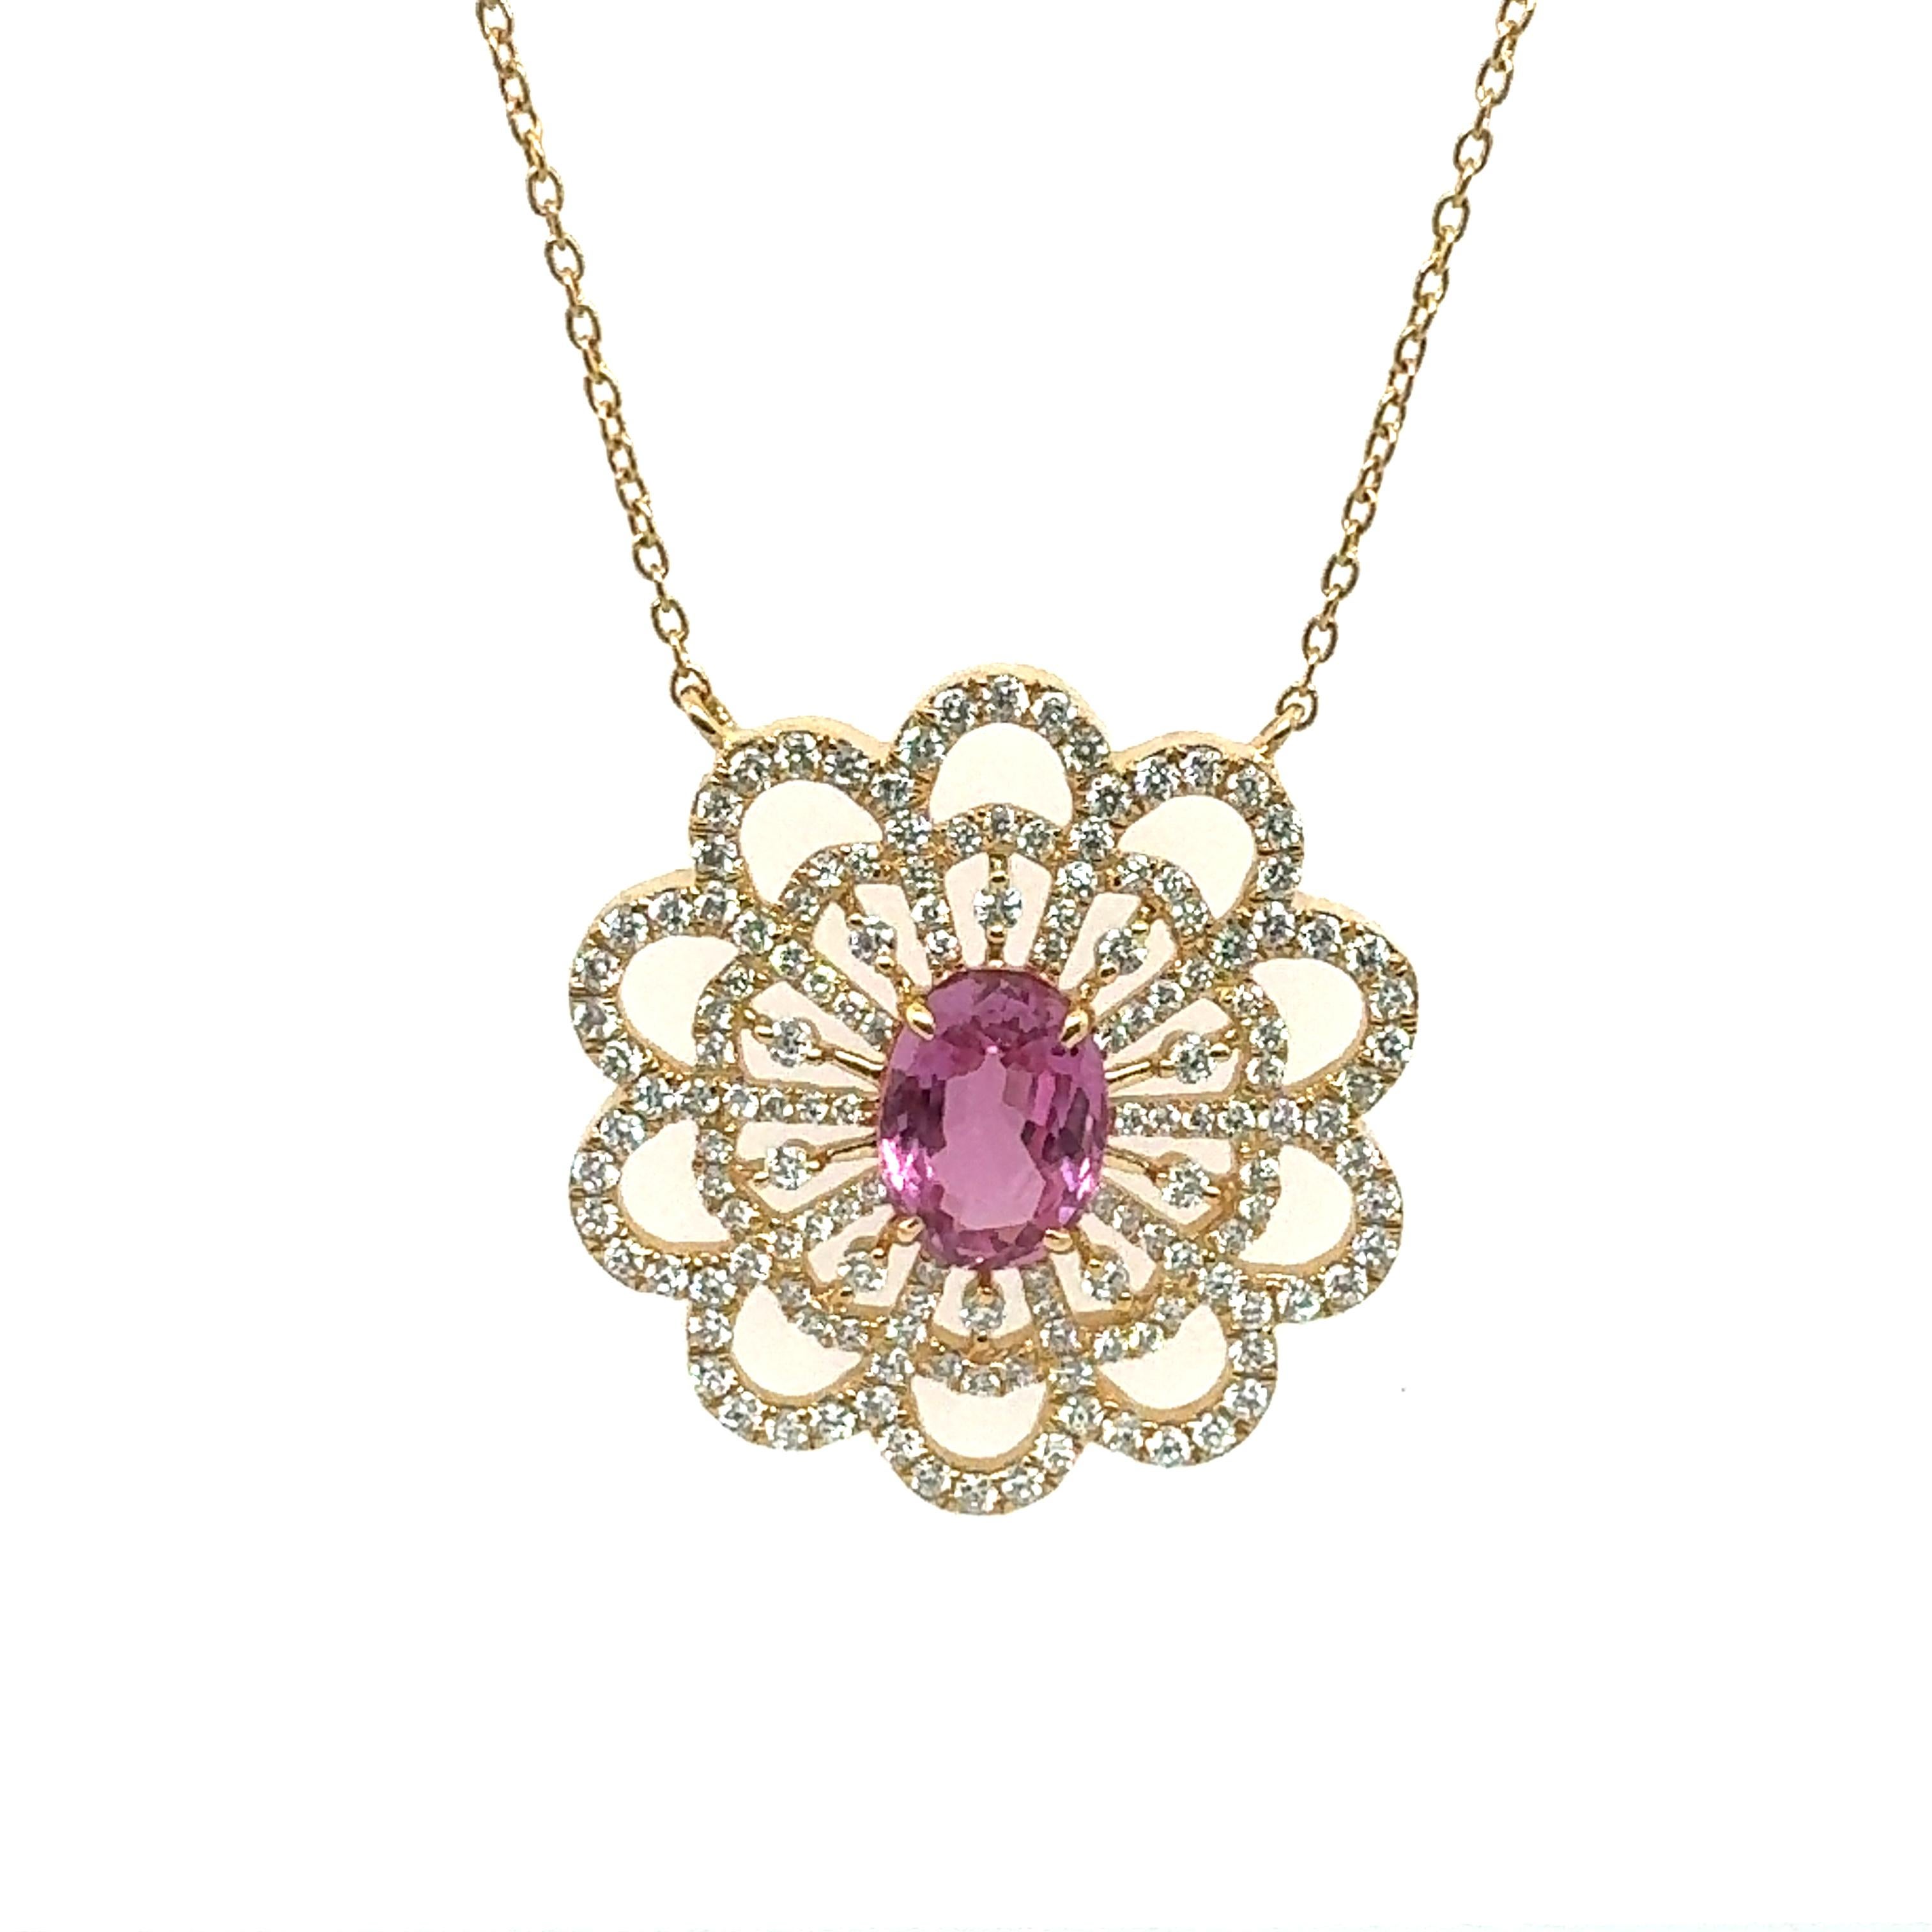 An exquisite necklace made of 18-karat yellow gold, set with a 0.81-carat diamond and a 1.61-carat natural pink sapphire. The necklace chain has a diamond by yard chain setting, and you are able to change the necklace's length as well. The necklace